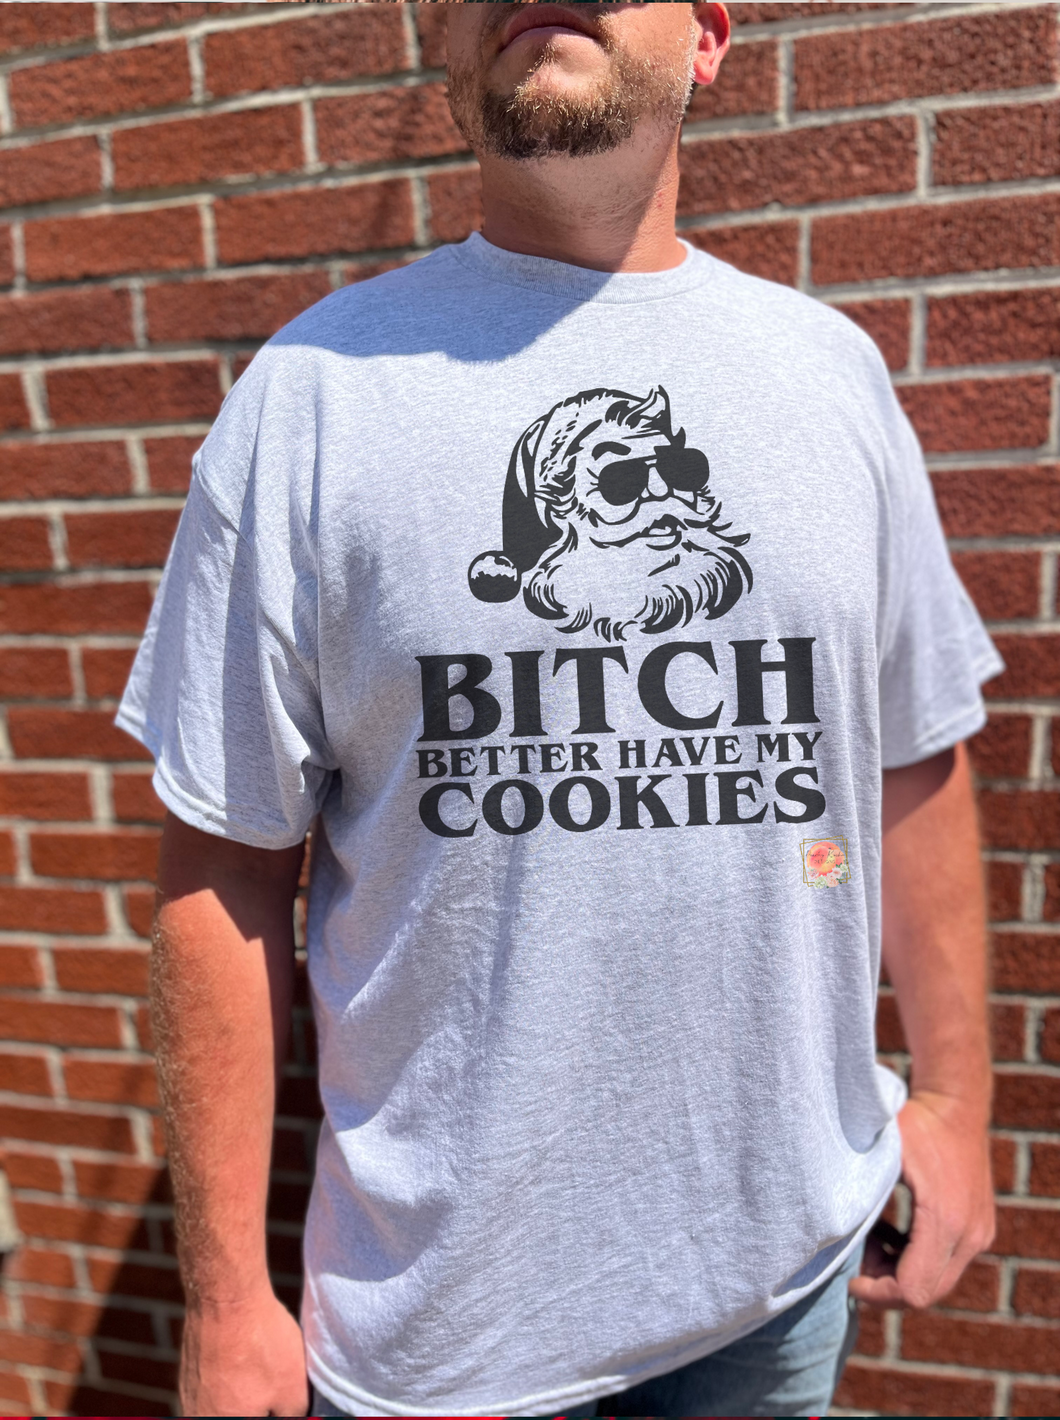 Bitch better have my cookies￼